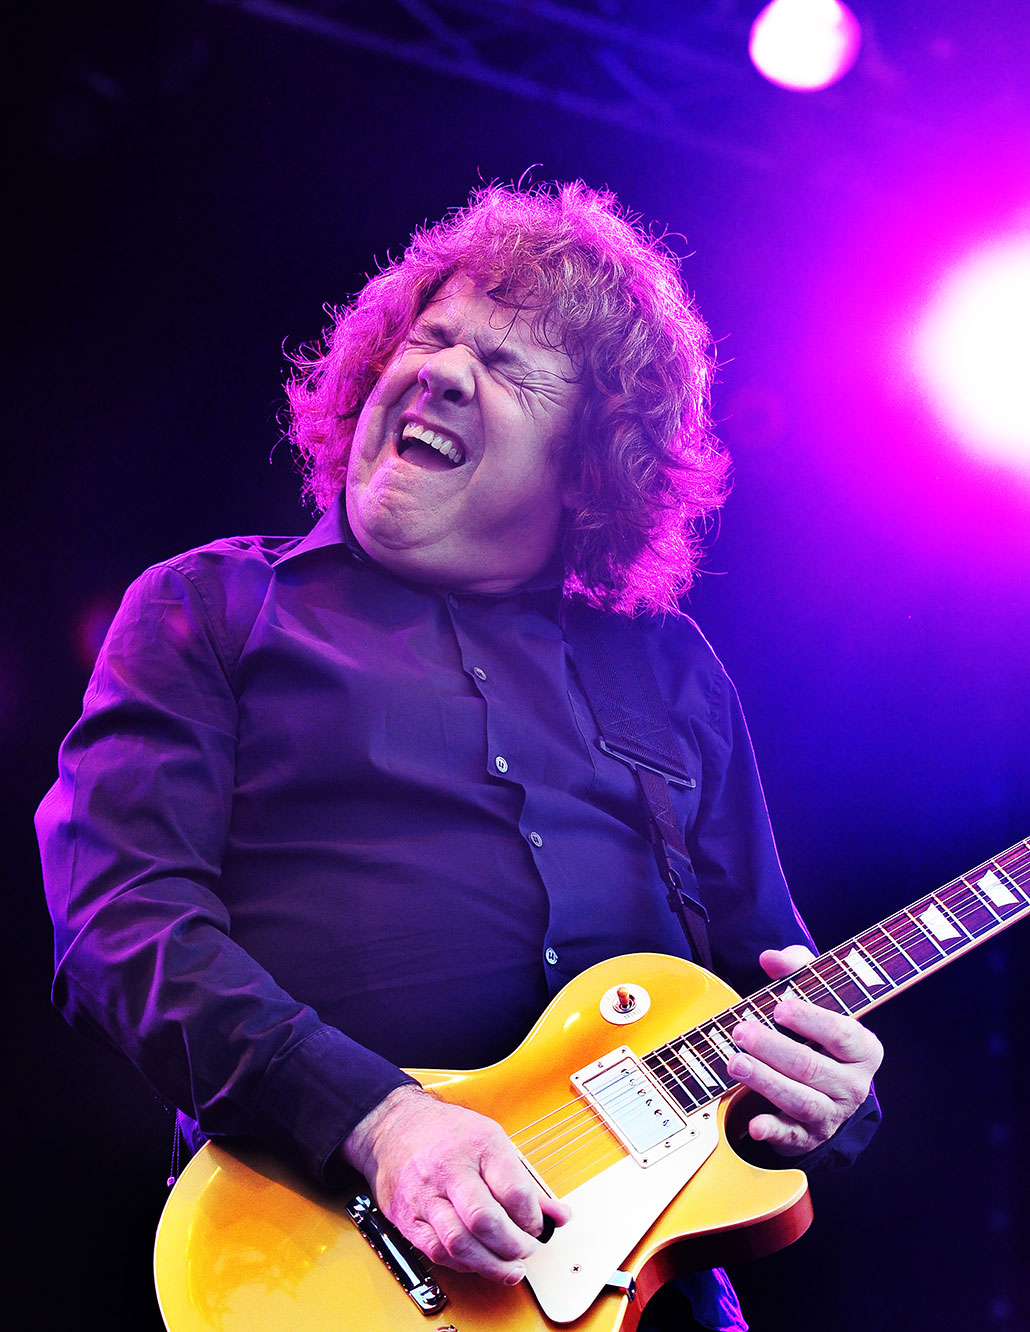 Gary Moore playing at the Beach of Pite-Havsbad, outside the city of Piteå in Sweden. Tibban99, CC BY 3.0 <https://creativecommons.org/licenses/by/3.0>, via Wikimedia Commons